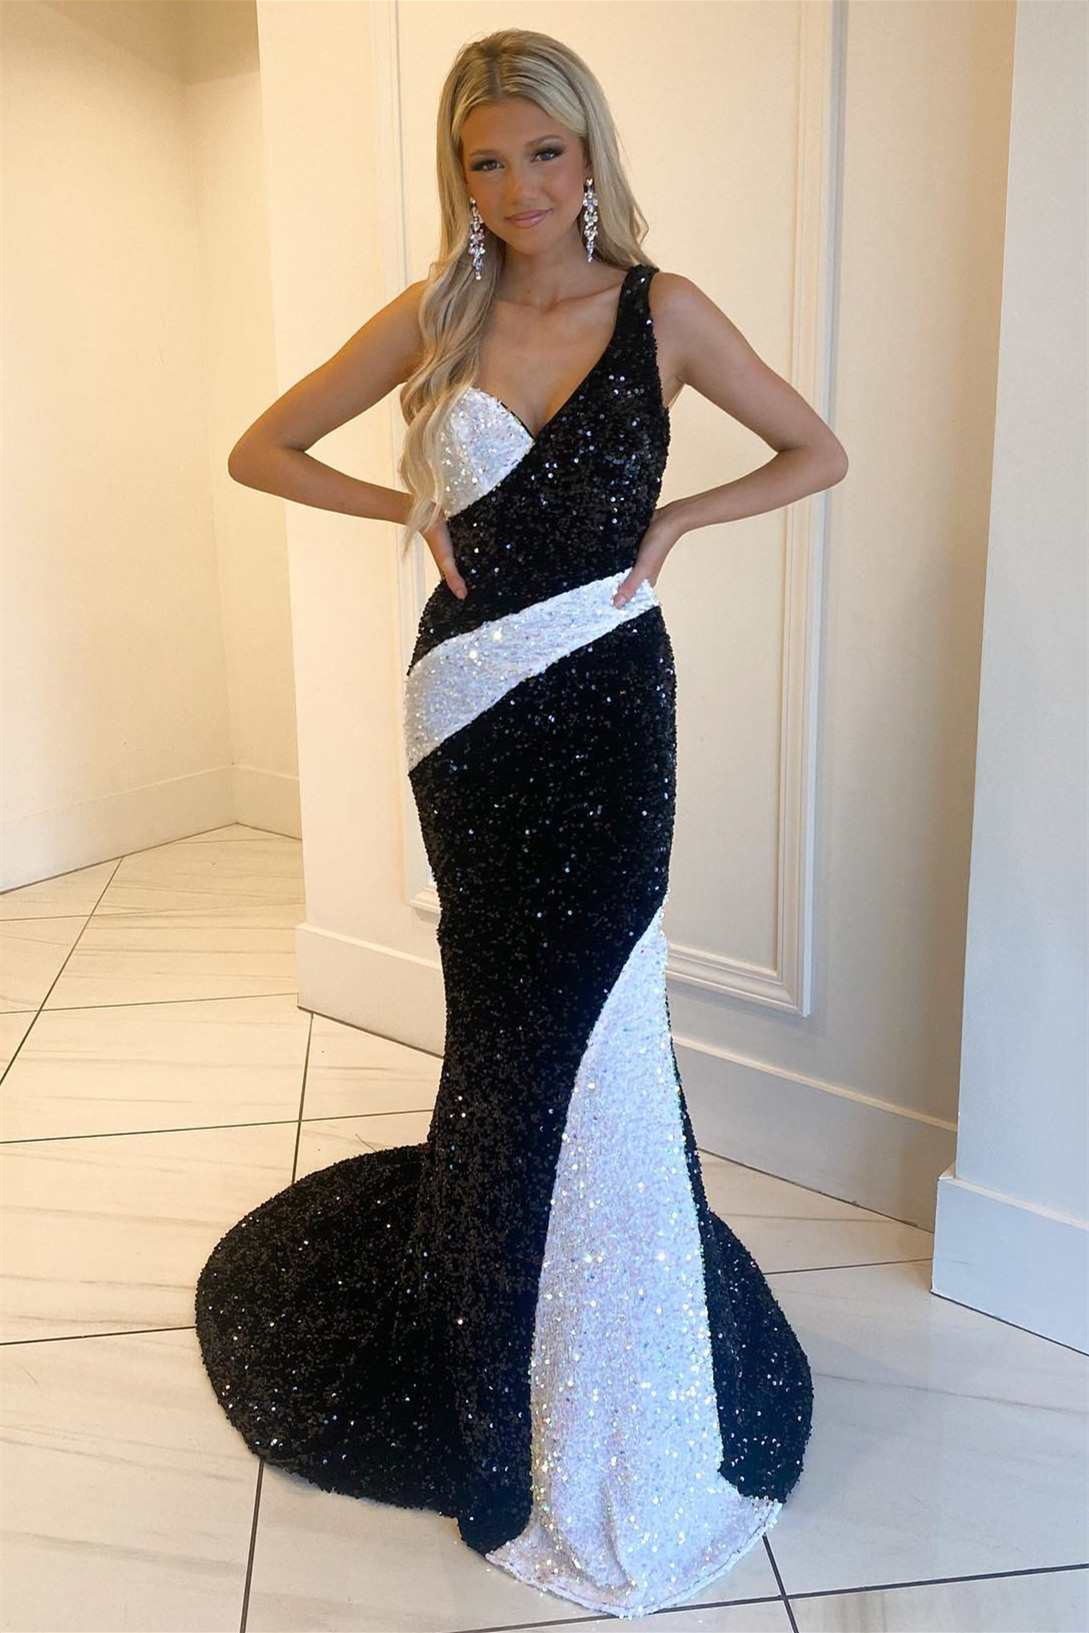 Bellasprom Black And White One Shoulder Sweetheart Sleeveless Mermaid Prom Dress With Sequins Bellasprom